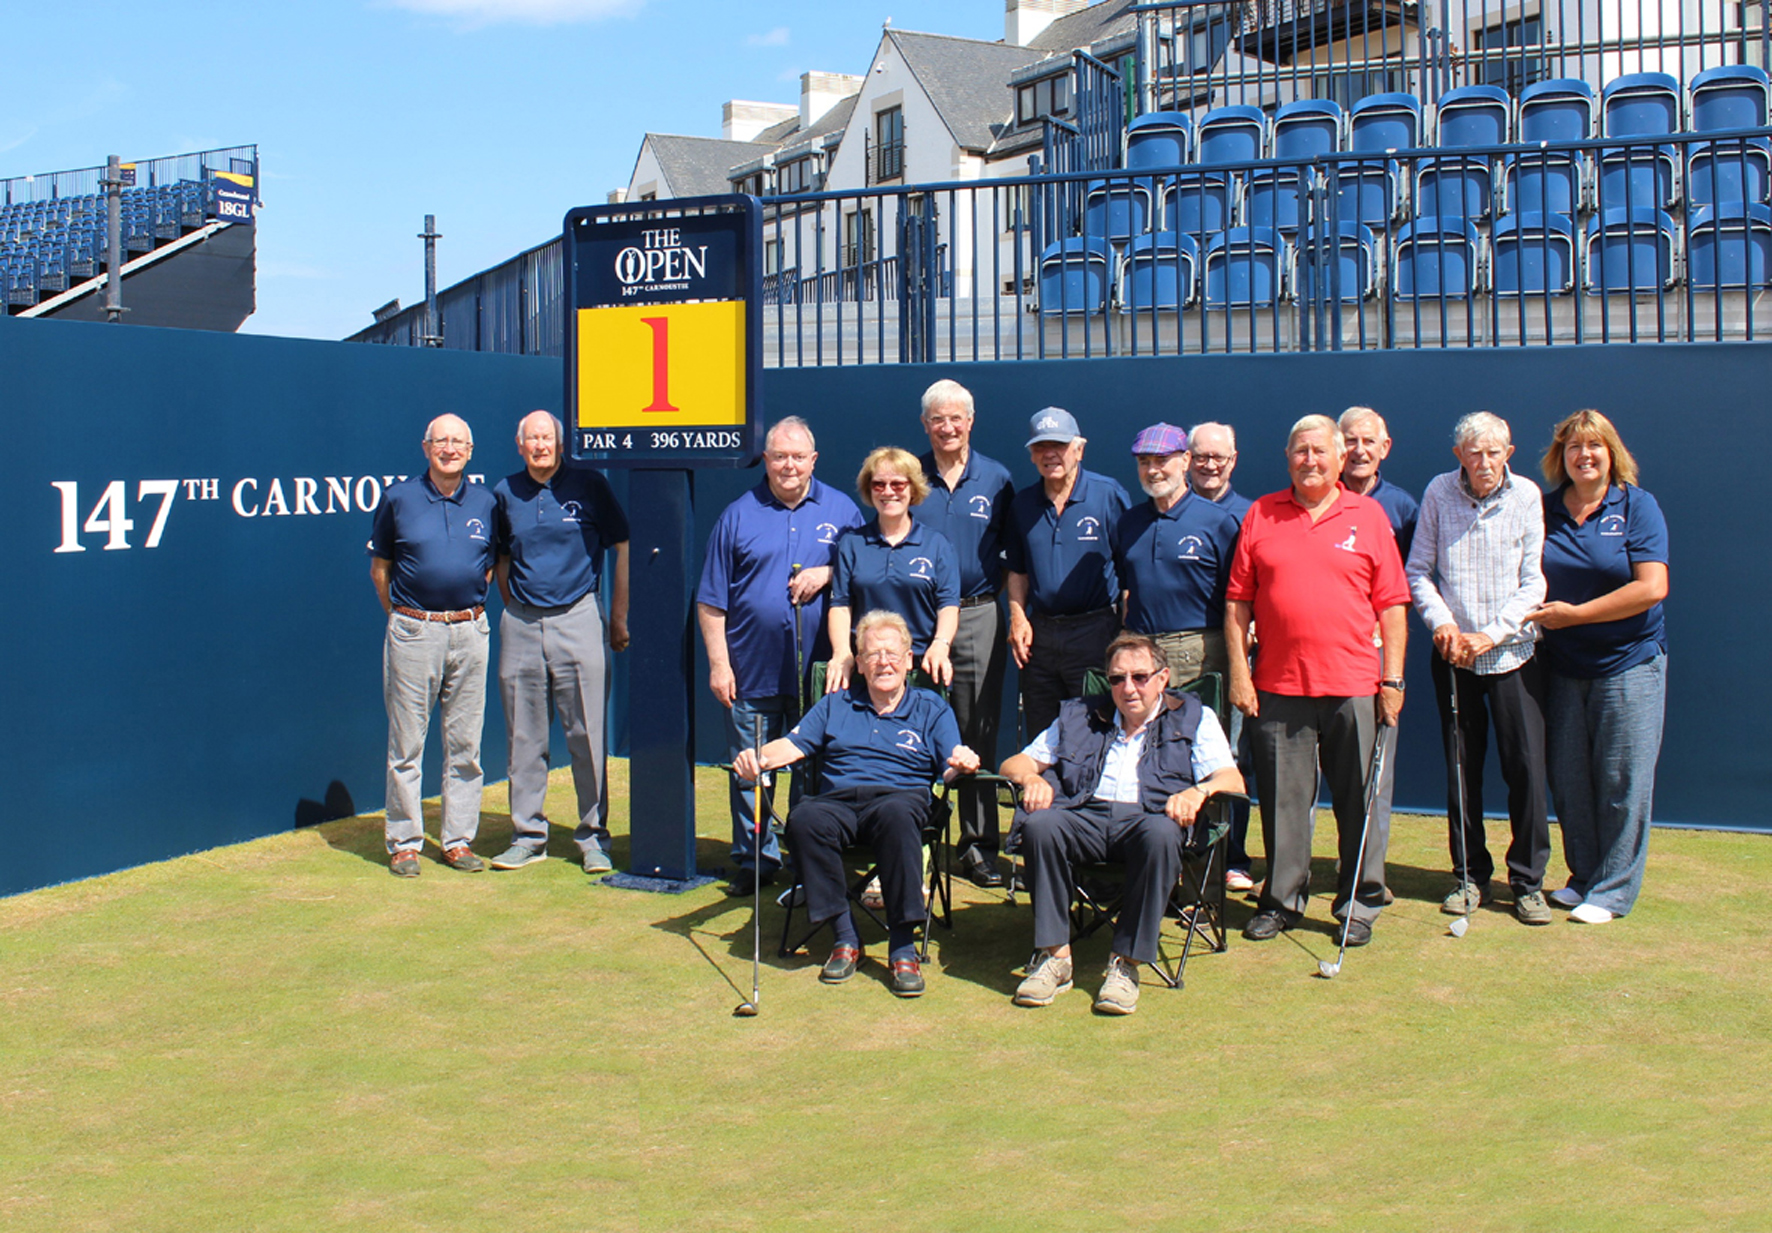 The Golf Memories Carnoustie Group on the 1st tee of the Championship Course ahead of The 147th Open